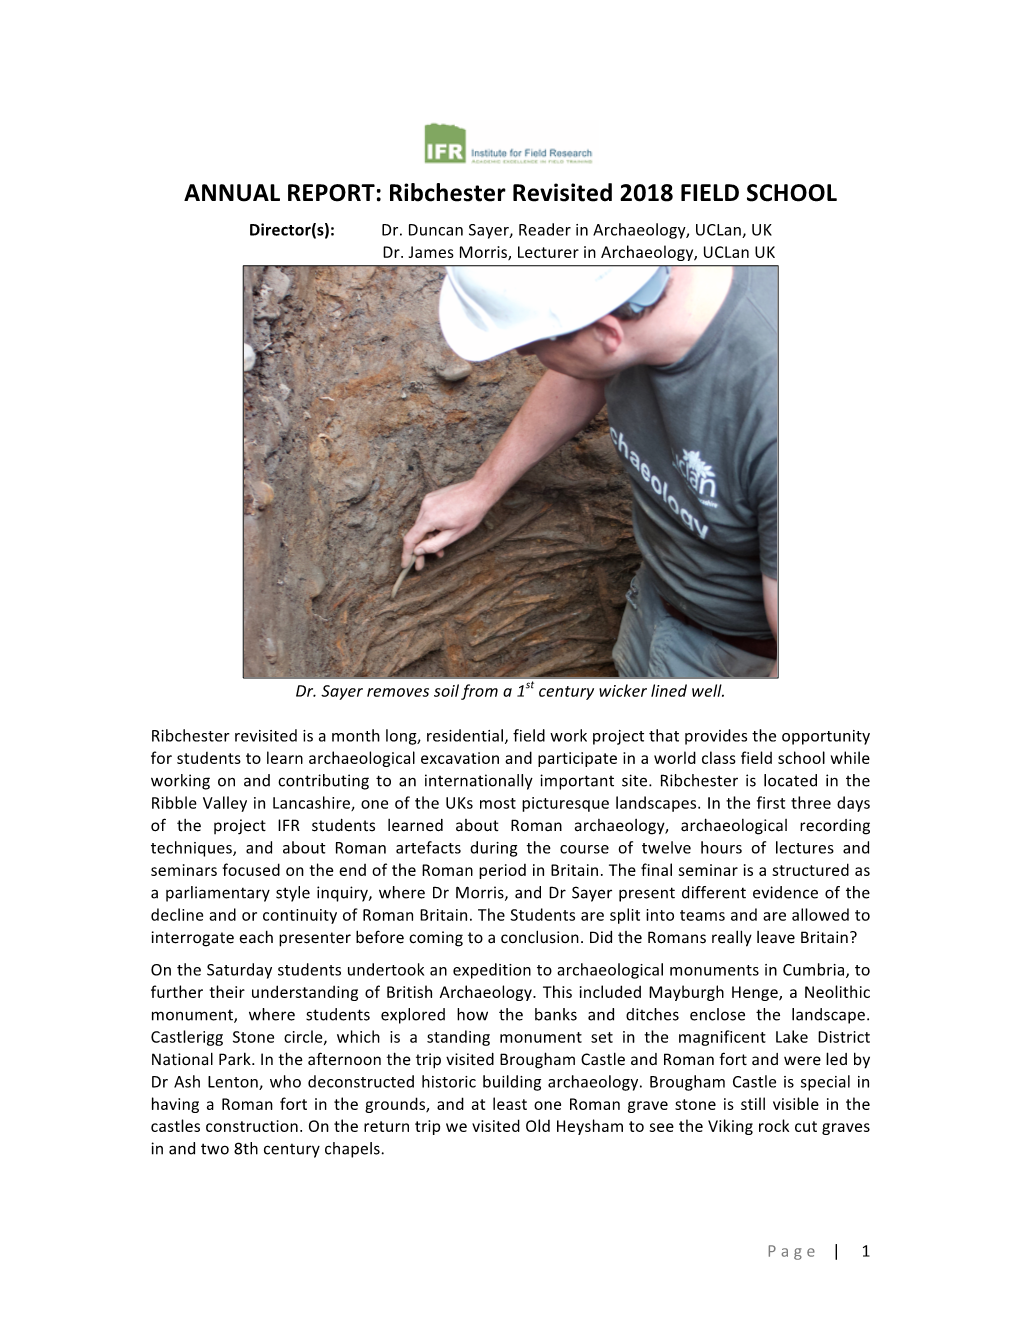 ANNUAL REPORT: Ribchester Revisited 2018 FIELD SCHOOL Director(S): Dr